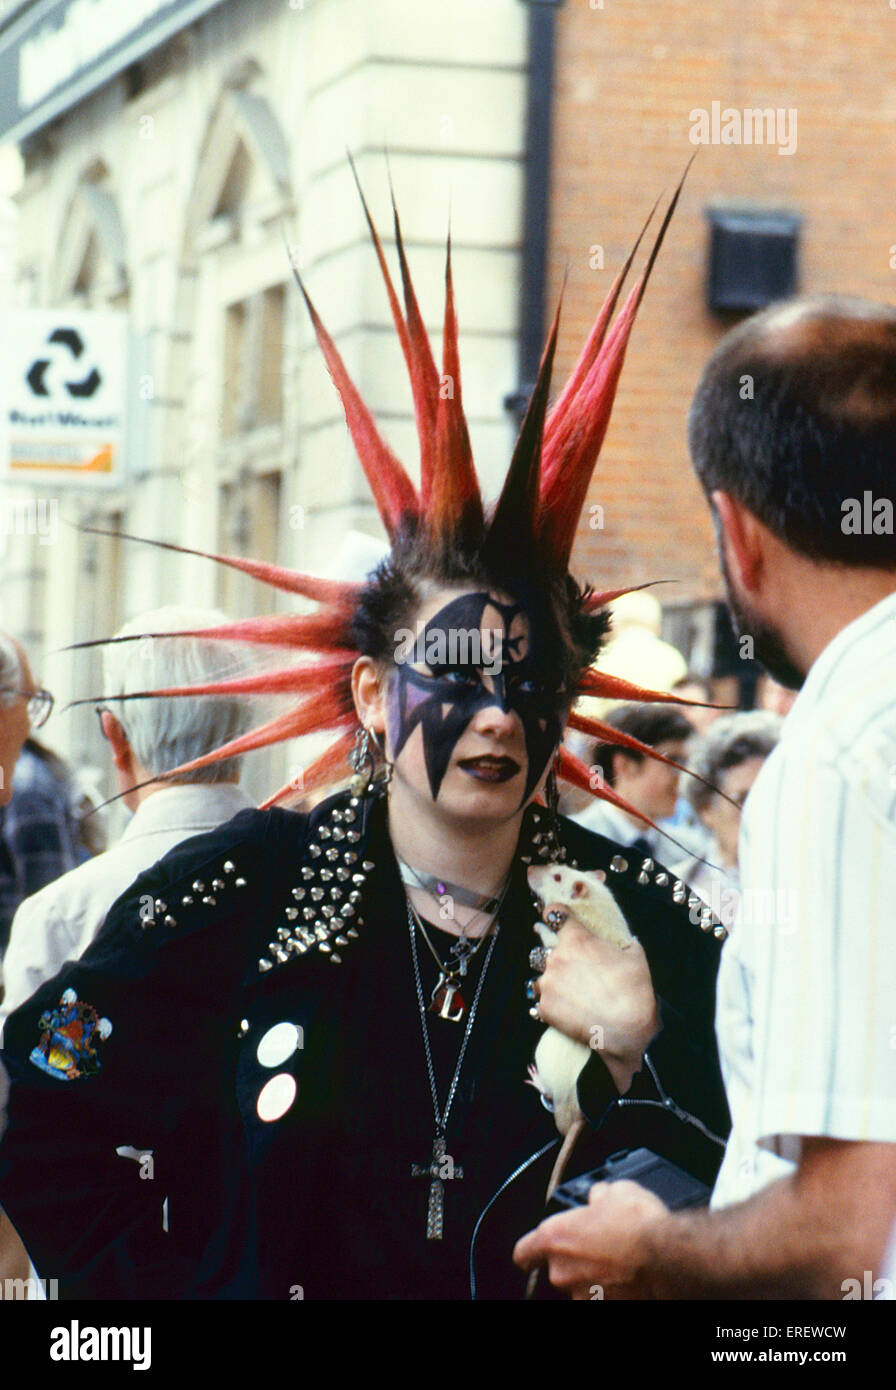 Punk girl with gothic make-up, extravagant hairdo and carrying a pet rat, pictured in the Covent Garden district of London in Stock Photo